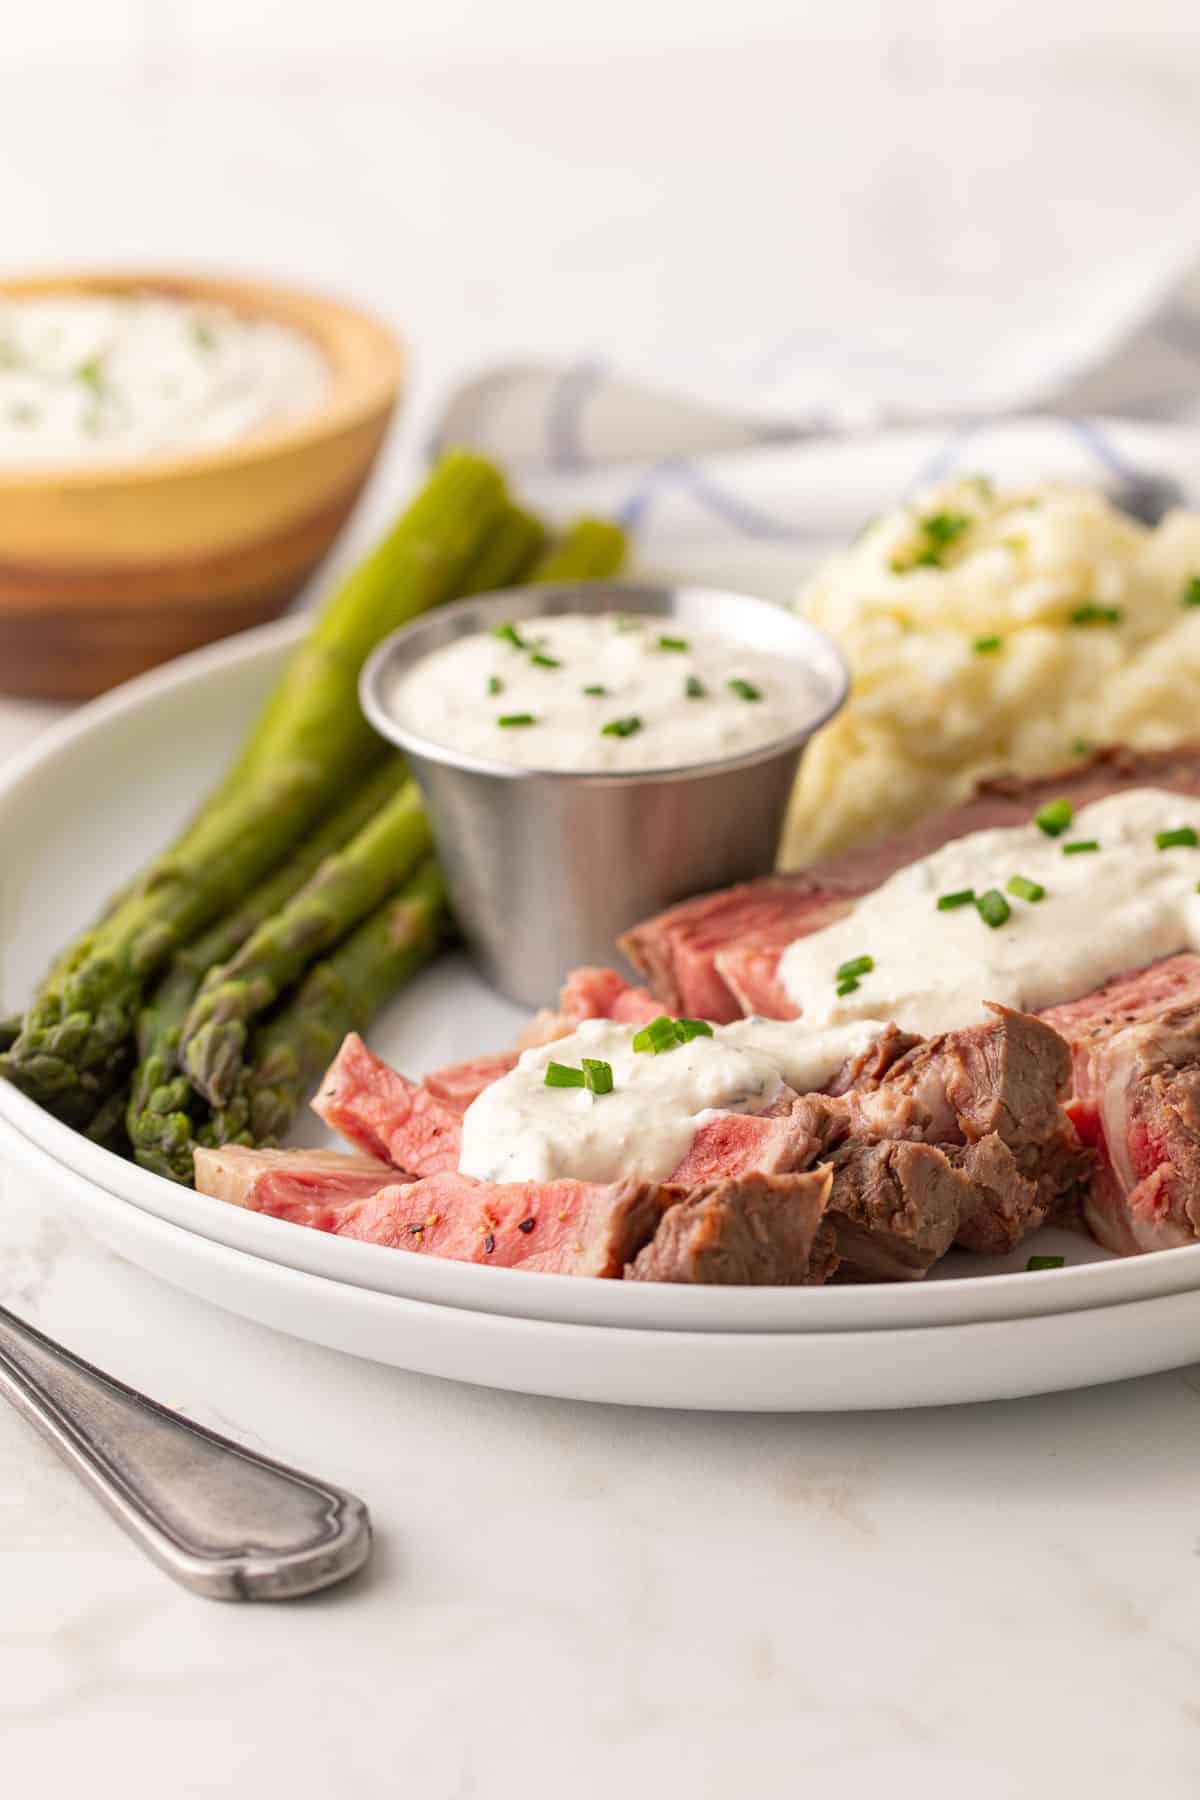 Front view of a sliced prime rib topped with horseradish sauce on a white plate.